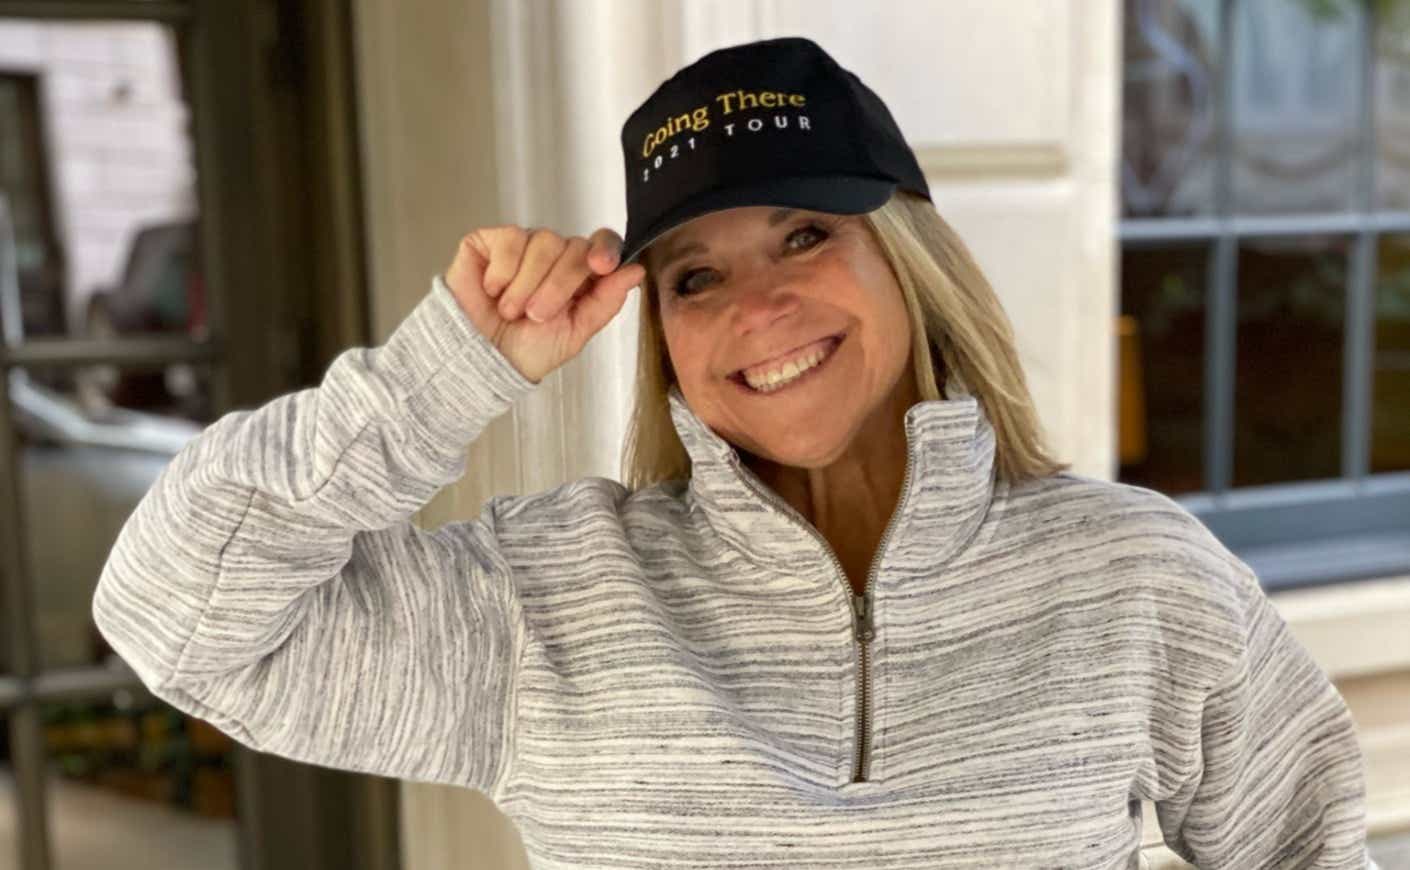 Katie Couric in a "Going There" hat